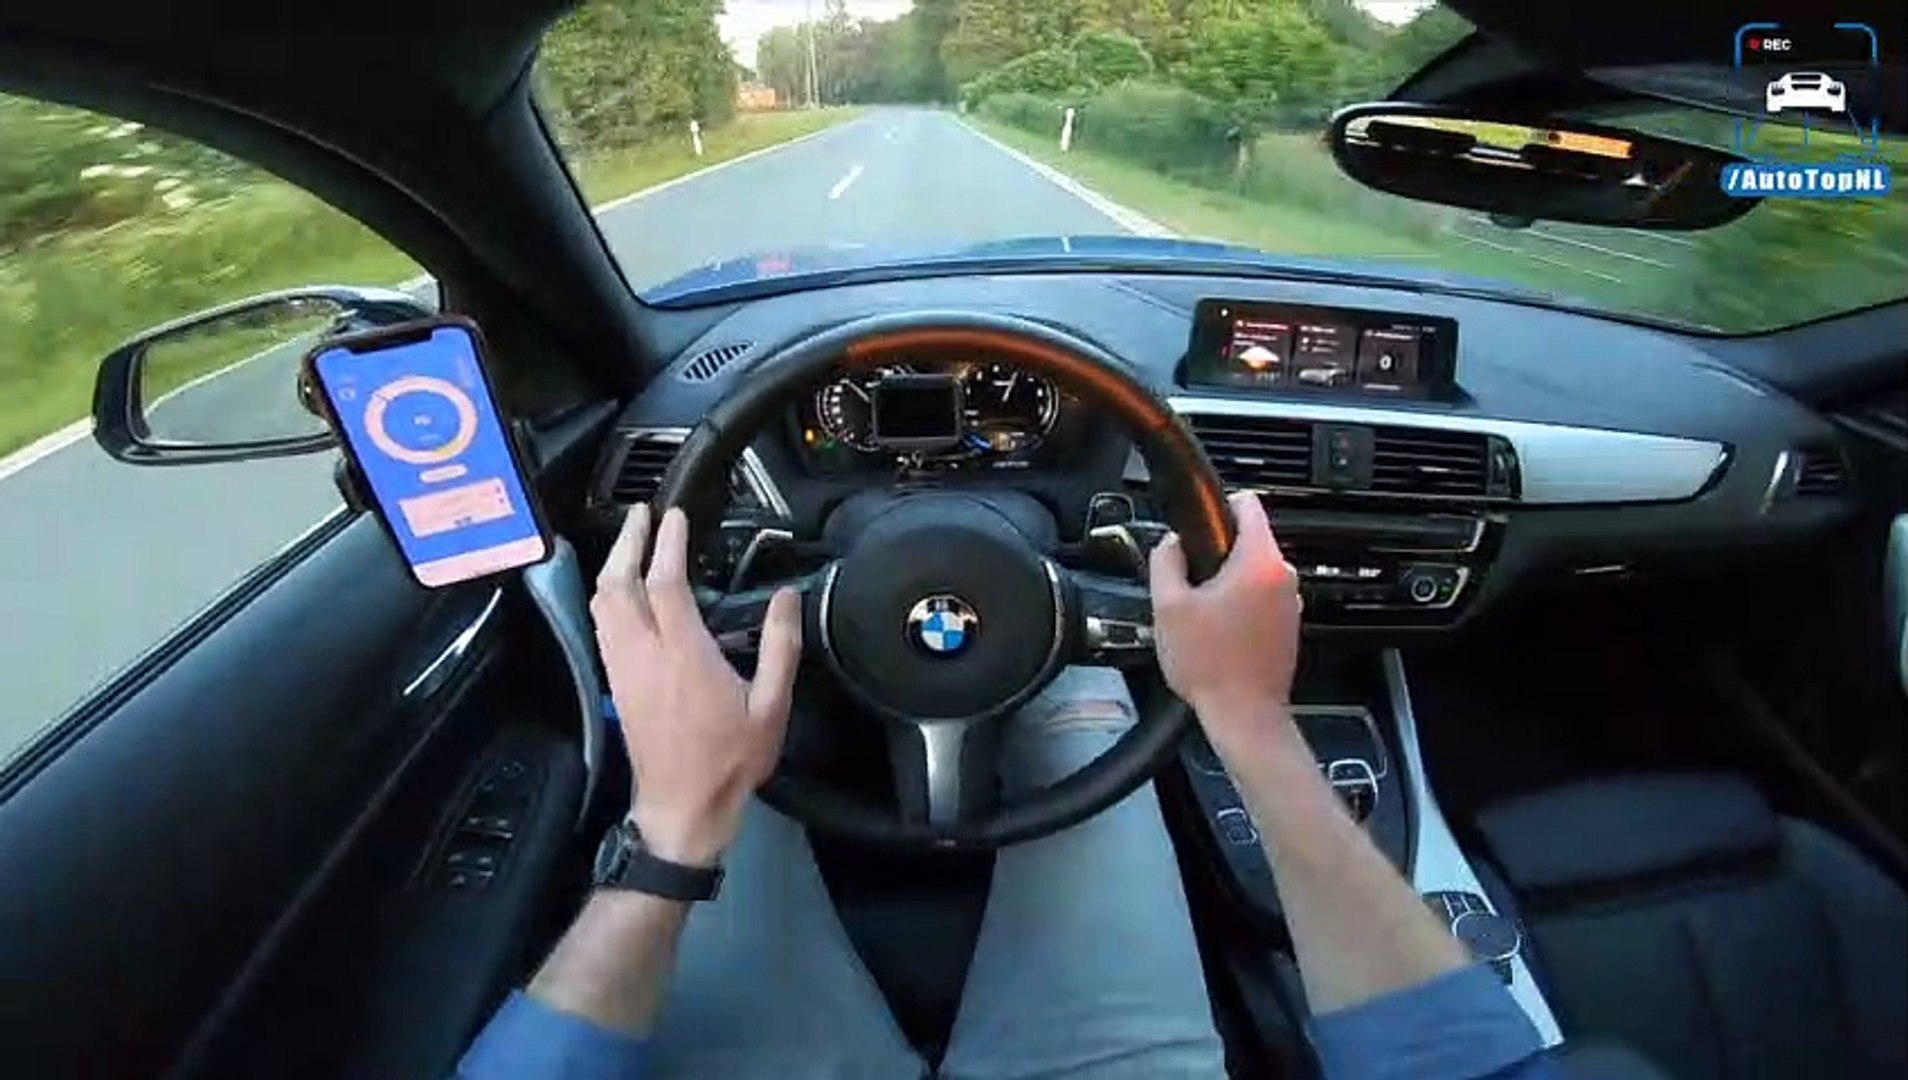 BMW M140i REVIEW POV Test Drive on AUTOBAHN & ROAD by AutoTopNL